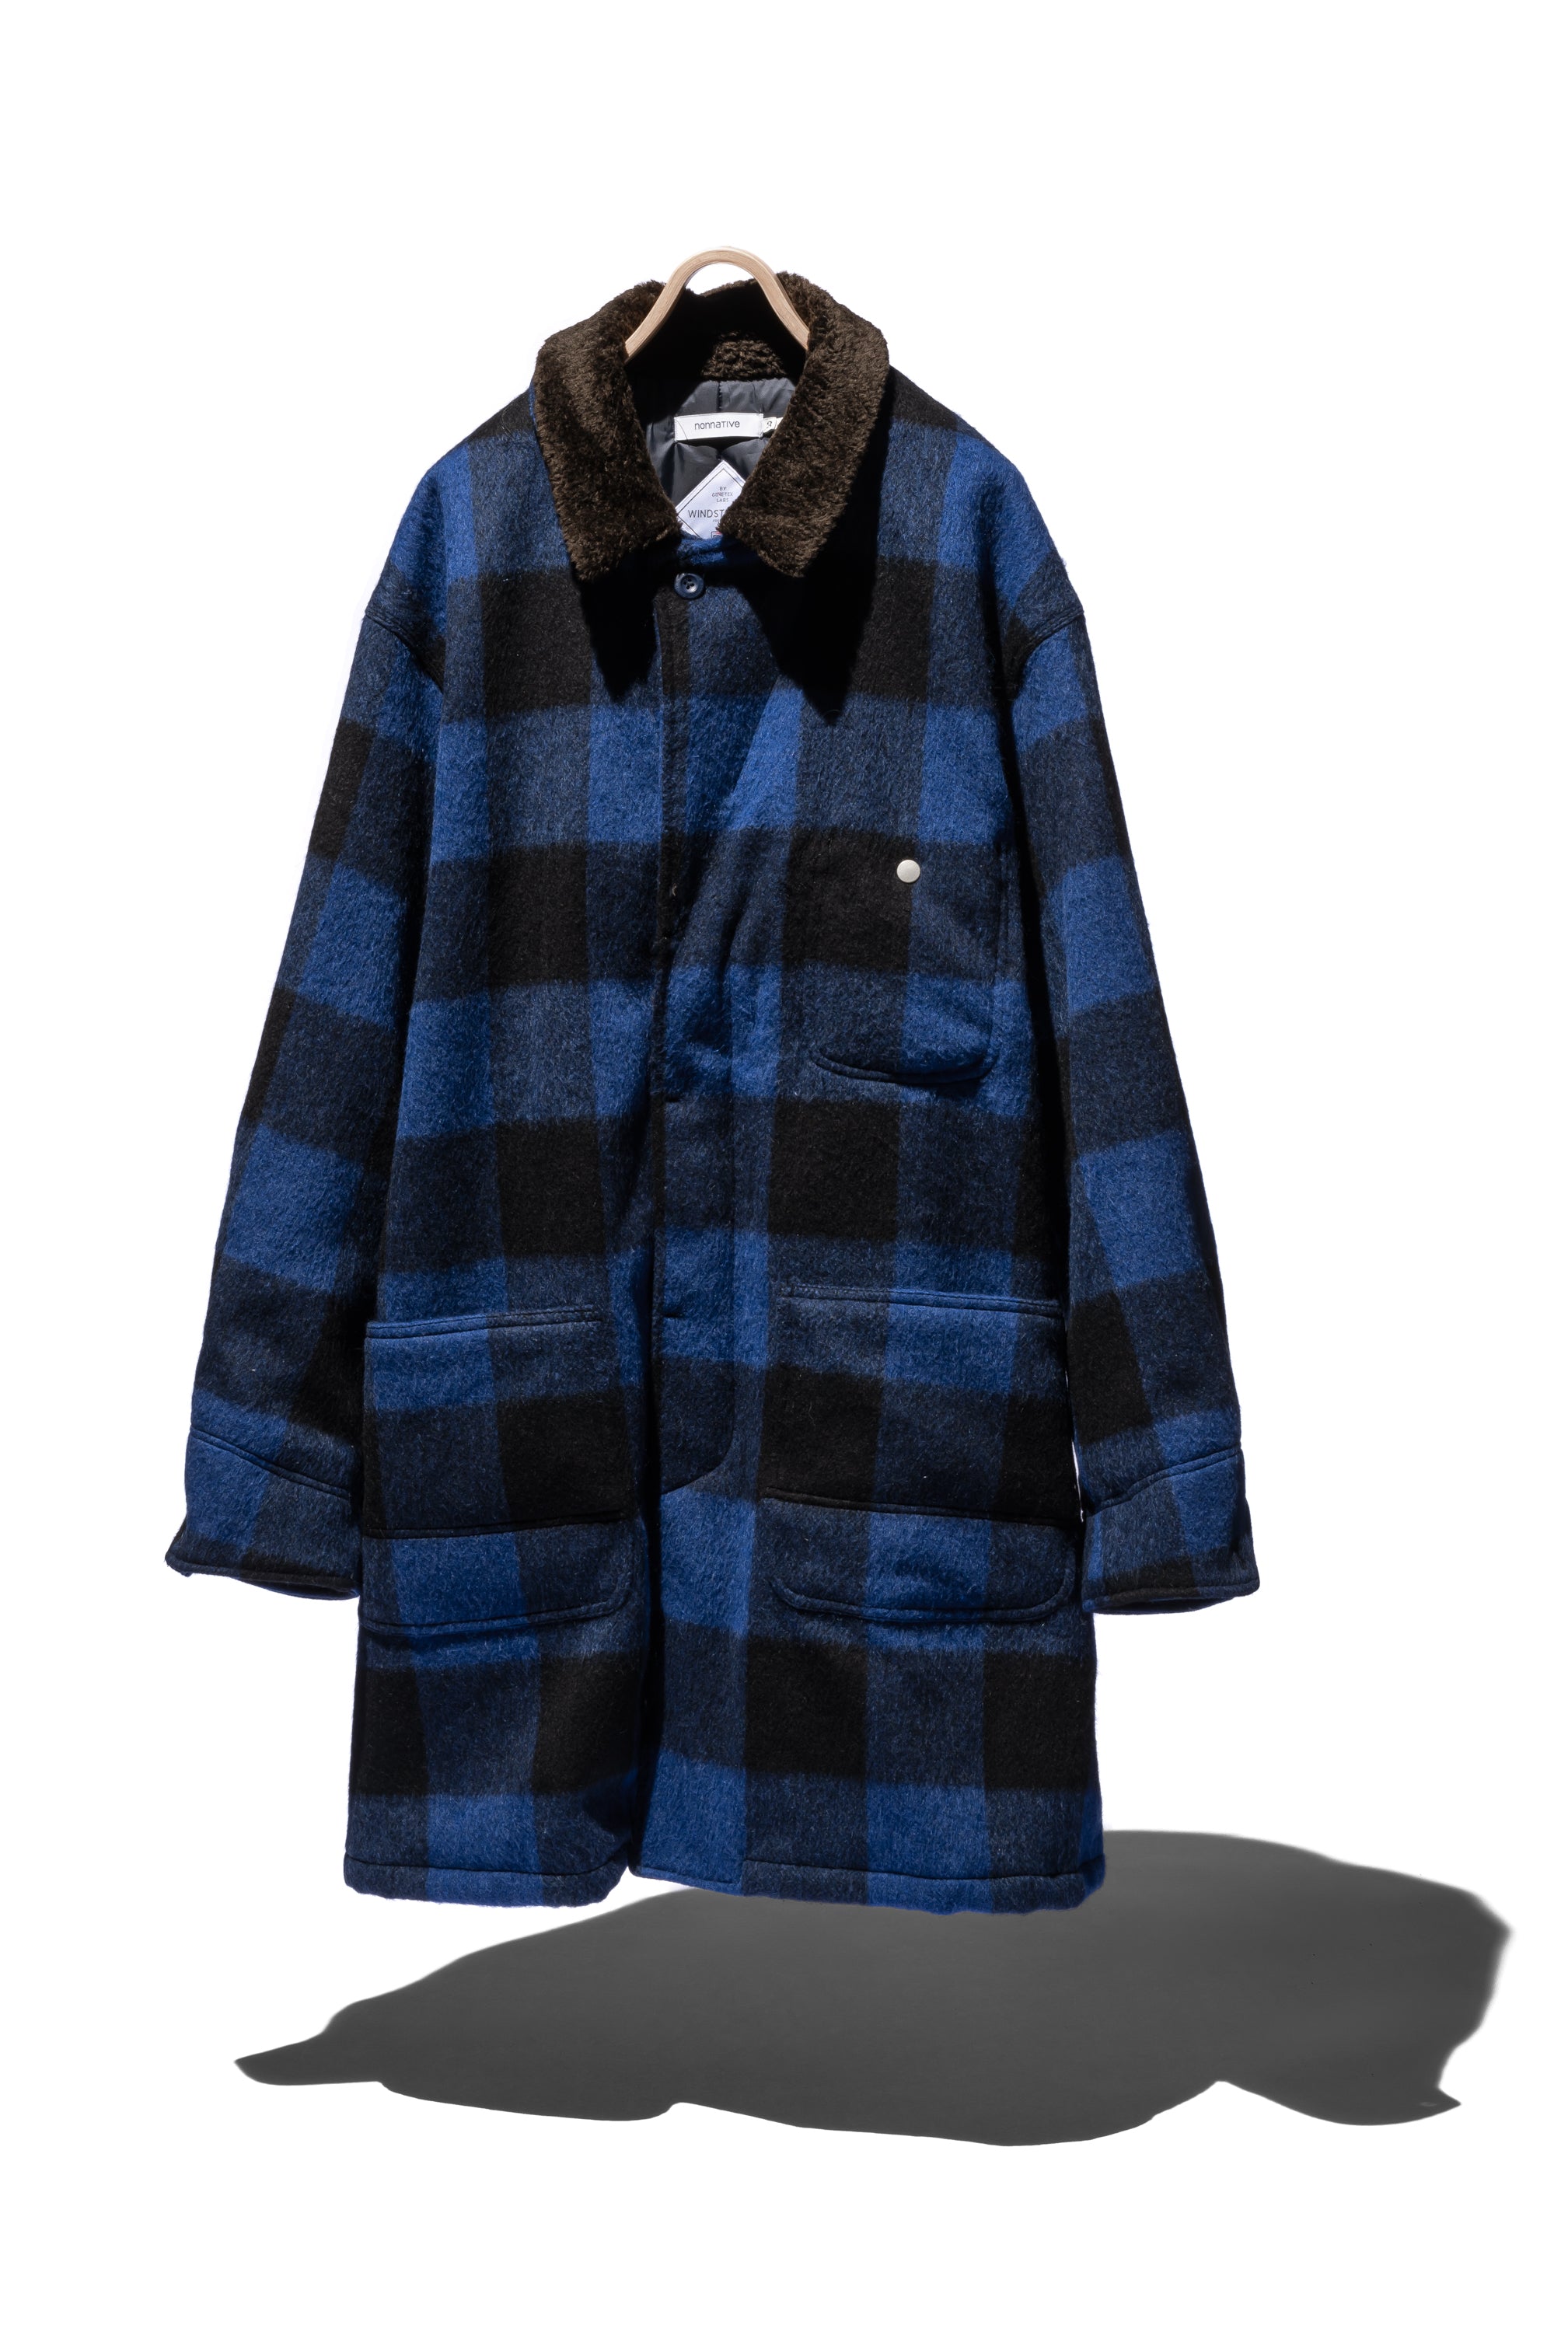 Rancher Long Coat W/P/N/A Wool Dobby Buffalo Check with GORE-TEX Windstopper